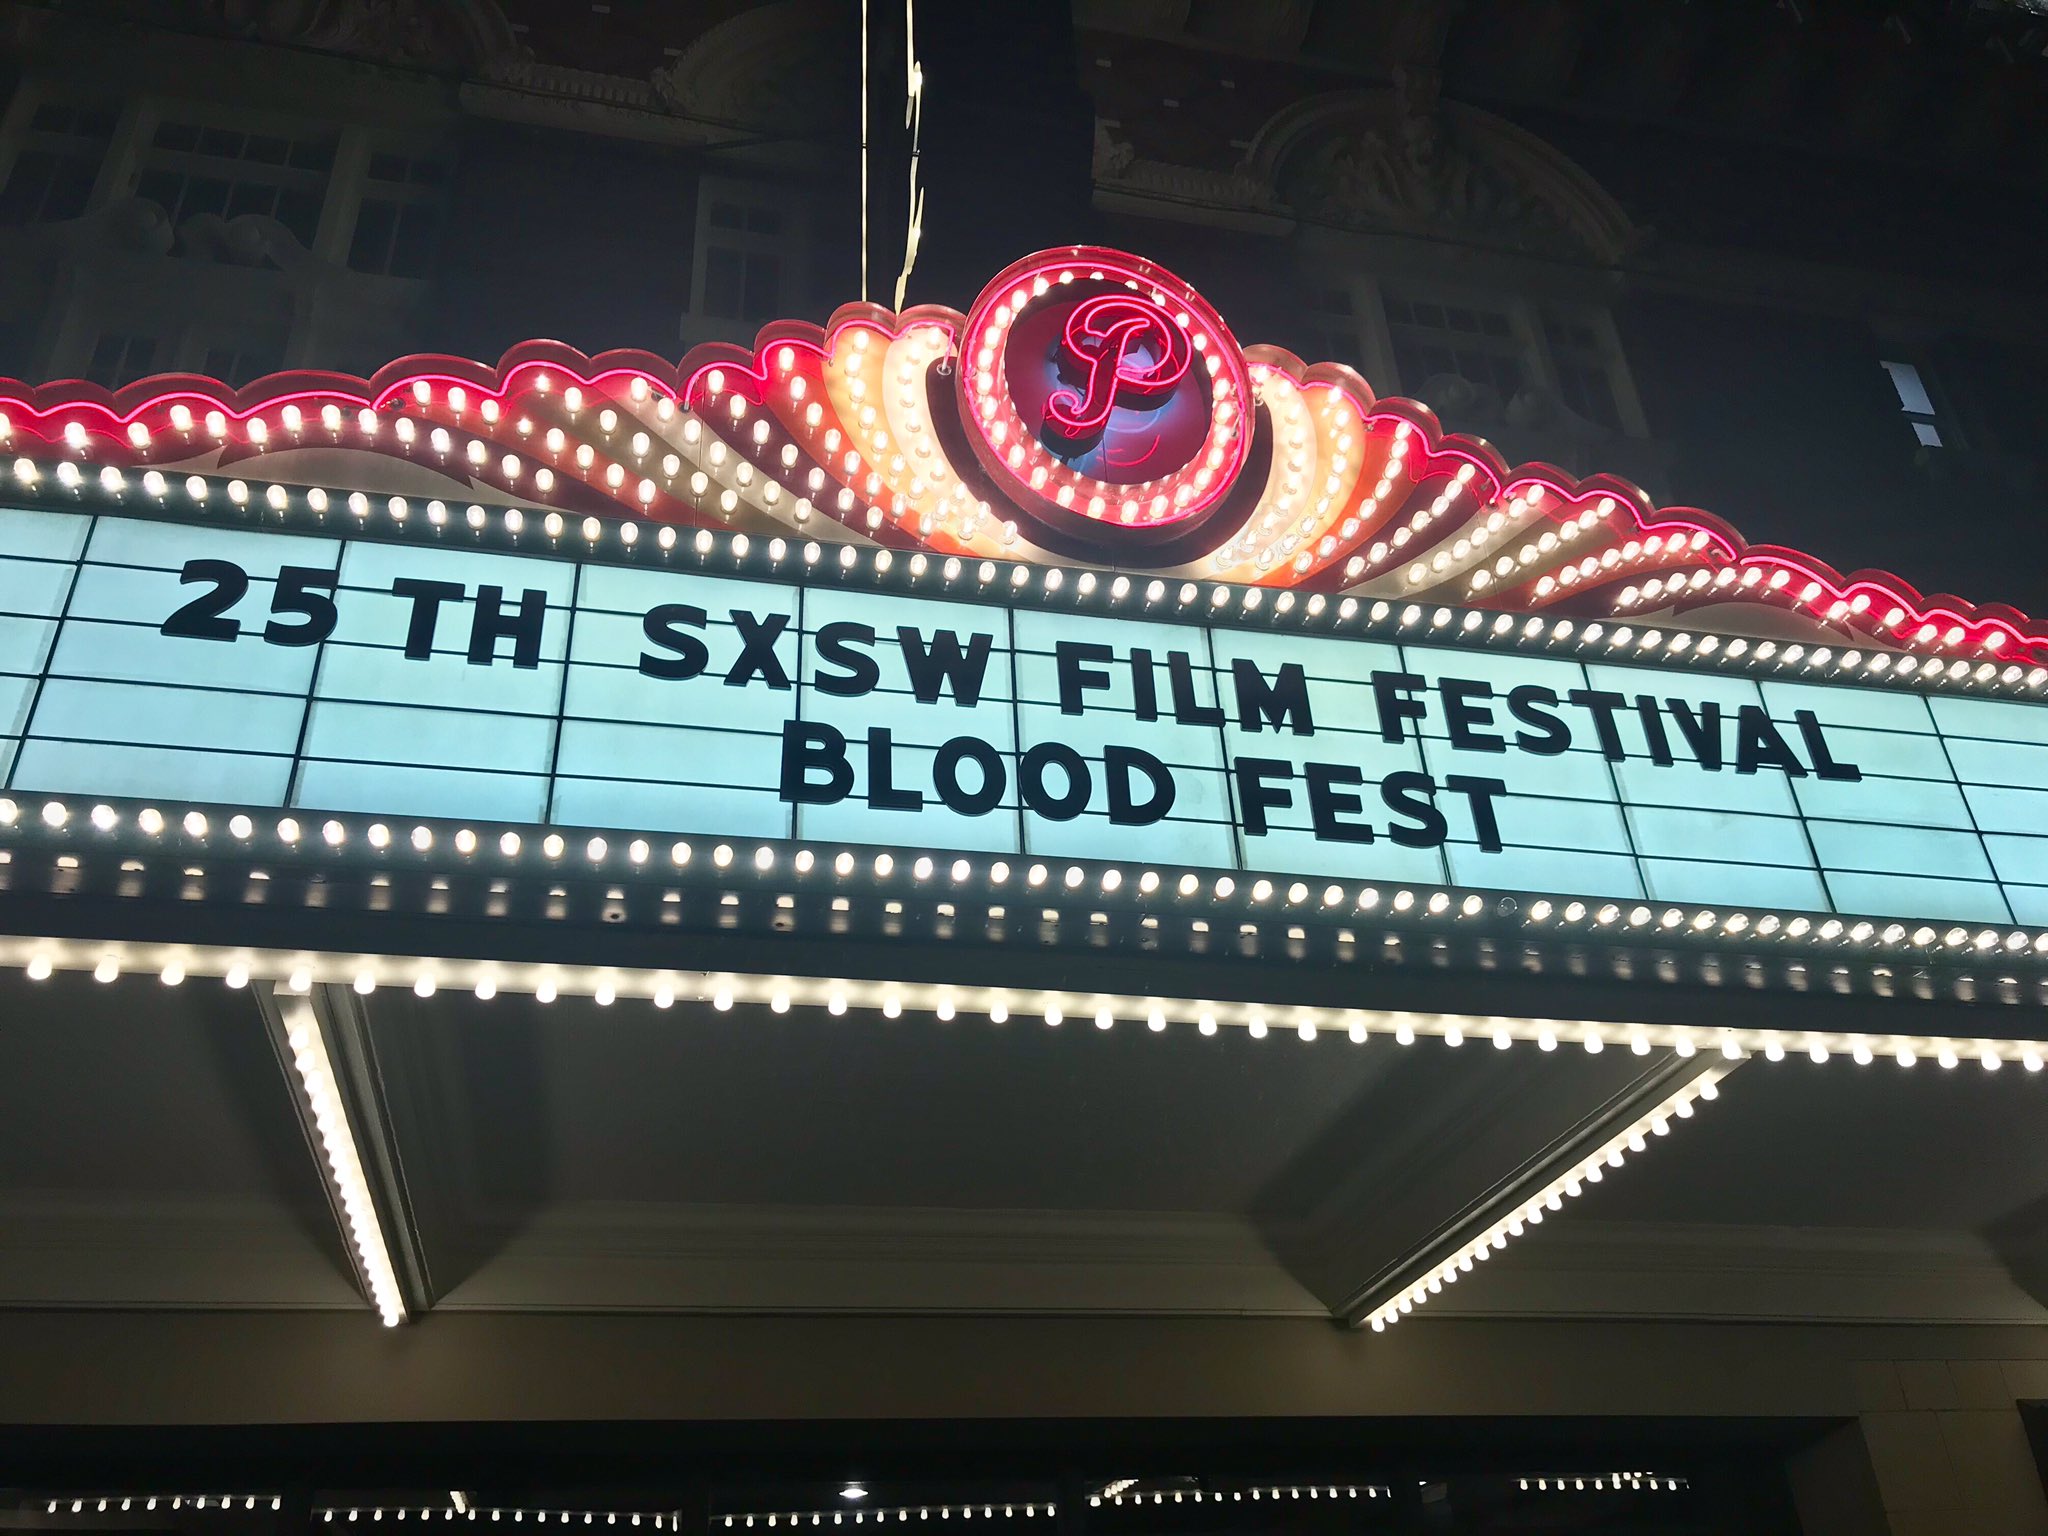 Adam Ellis On Twitter Got To See Blood Fest Tonight And Really Images, Photos, Reviews